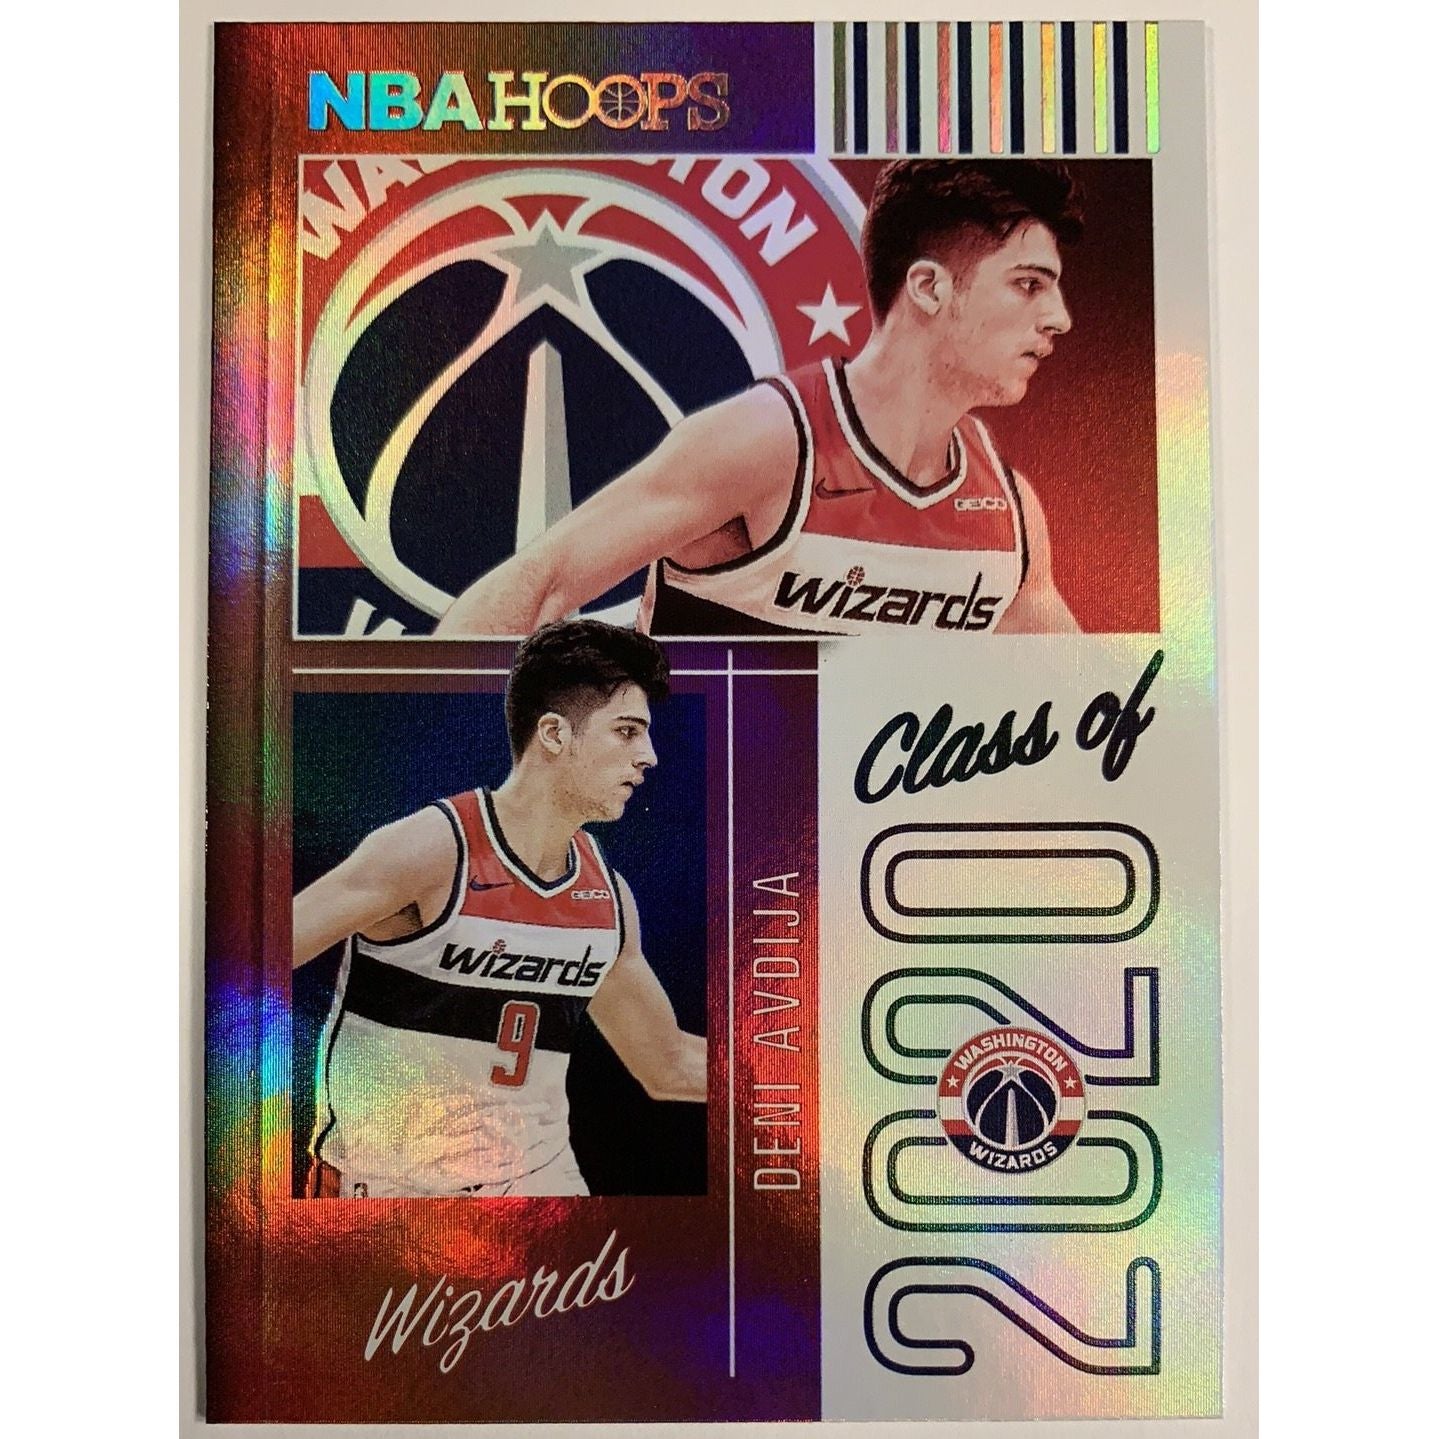  2019-20 Hoops Deni Avdija Class Of 2020 Holo  Local Legends Cards & Collectibles